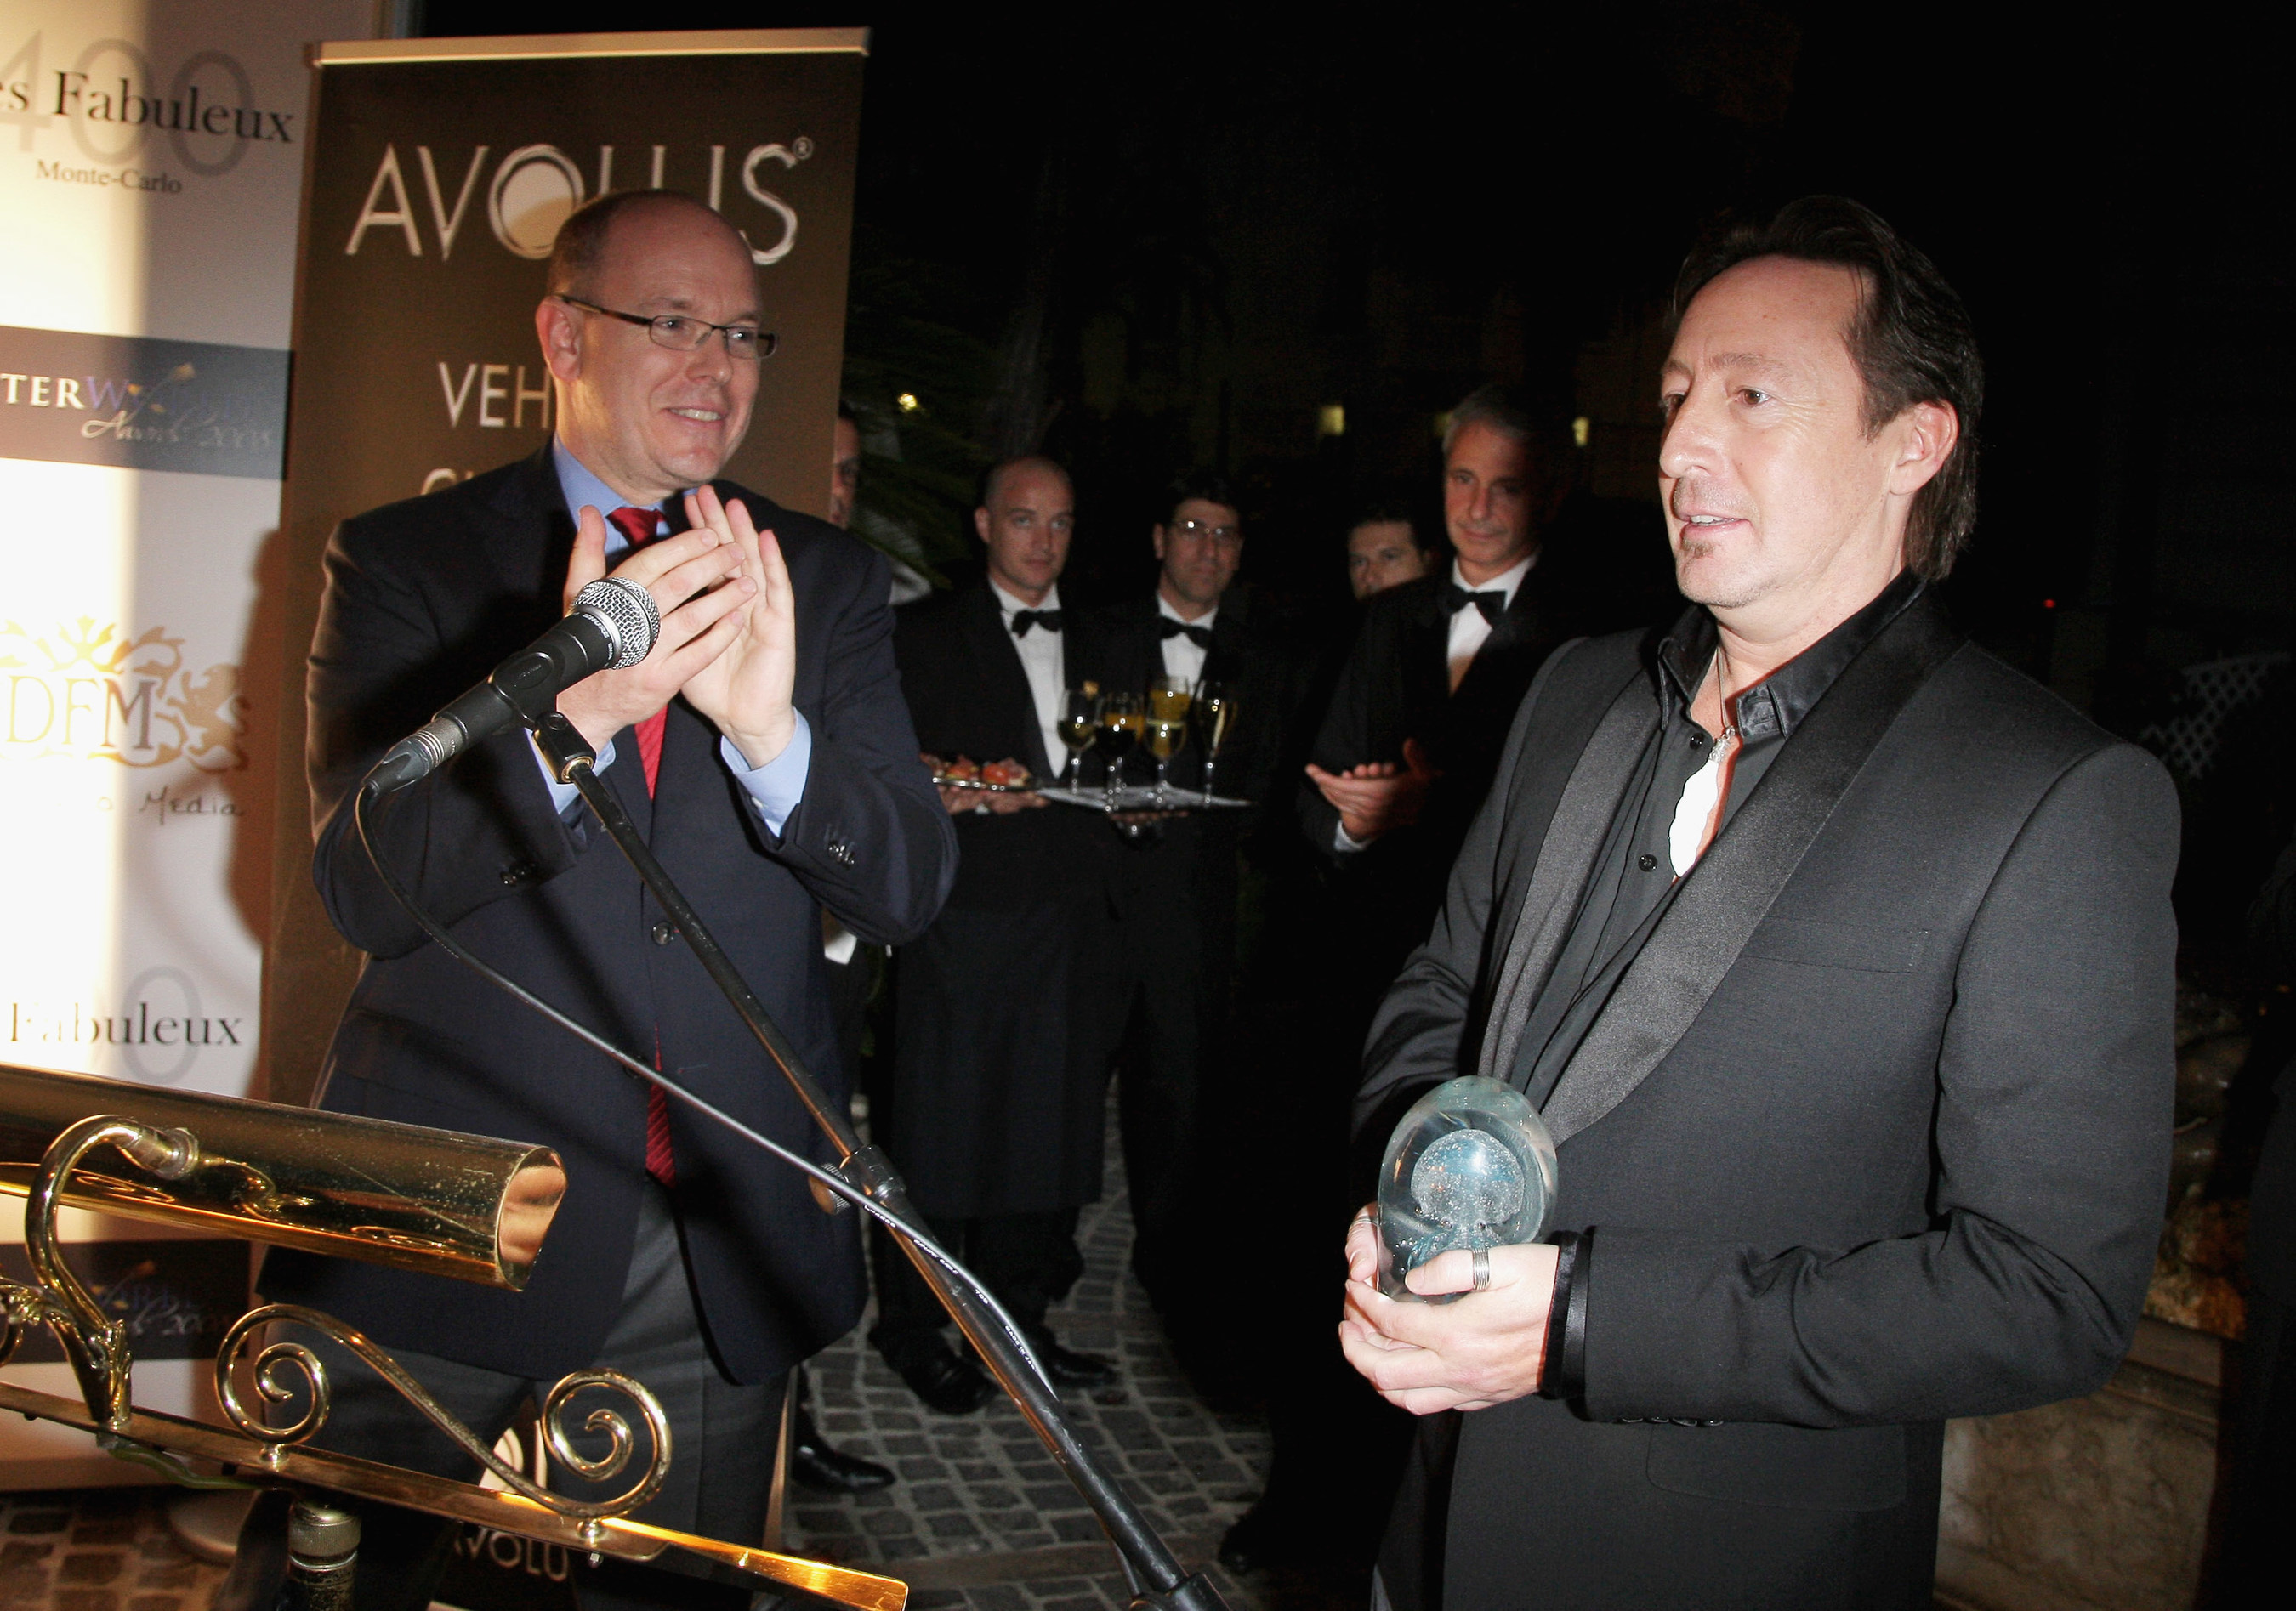 Prior year photo: HSH Prince Albert II of Monaco giving Julian Lennon the Environmental Award at the Better World Awards held at the Hotel De Paris.